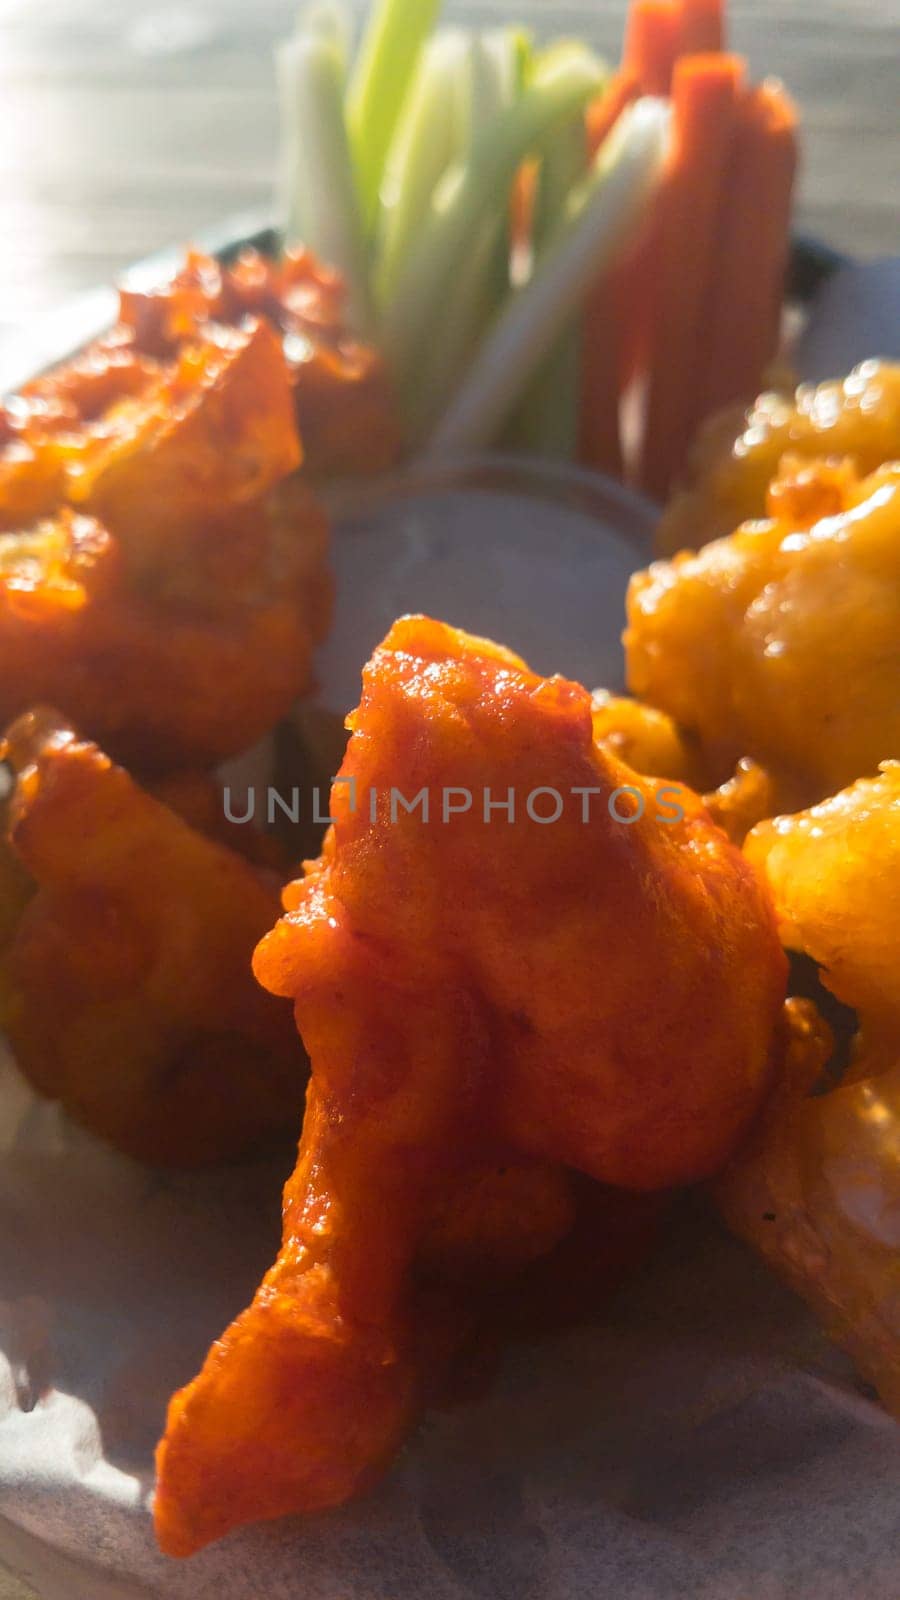 Vegan Cauliflower Buffalo Wings With Ranch Sauce And Vegetable Sticks by RobertPB